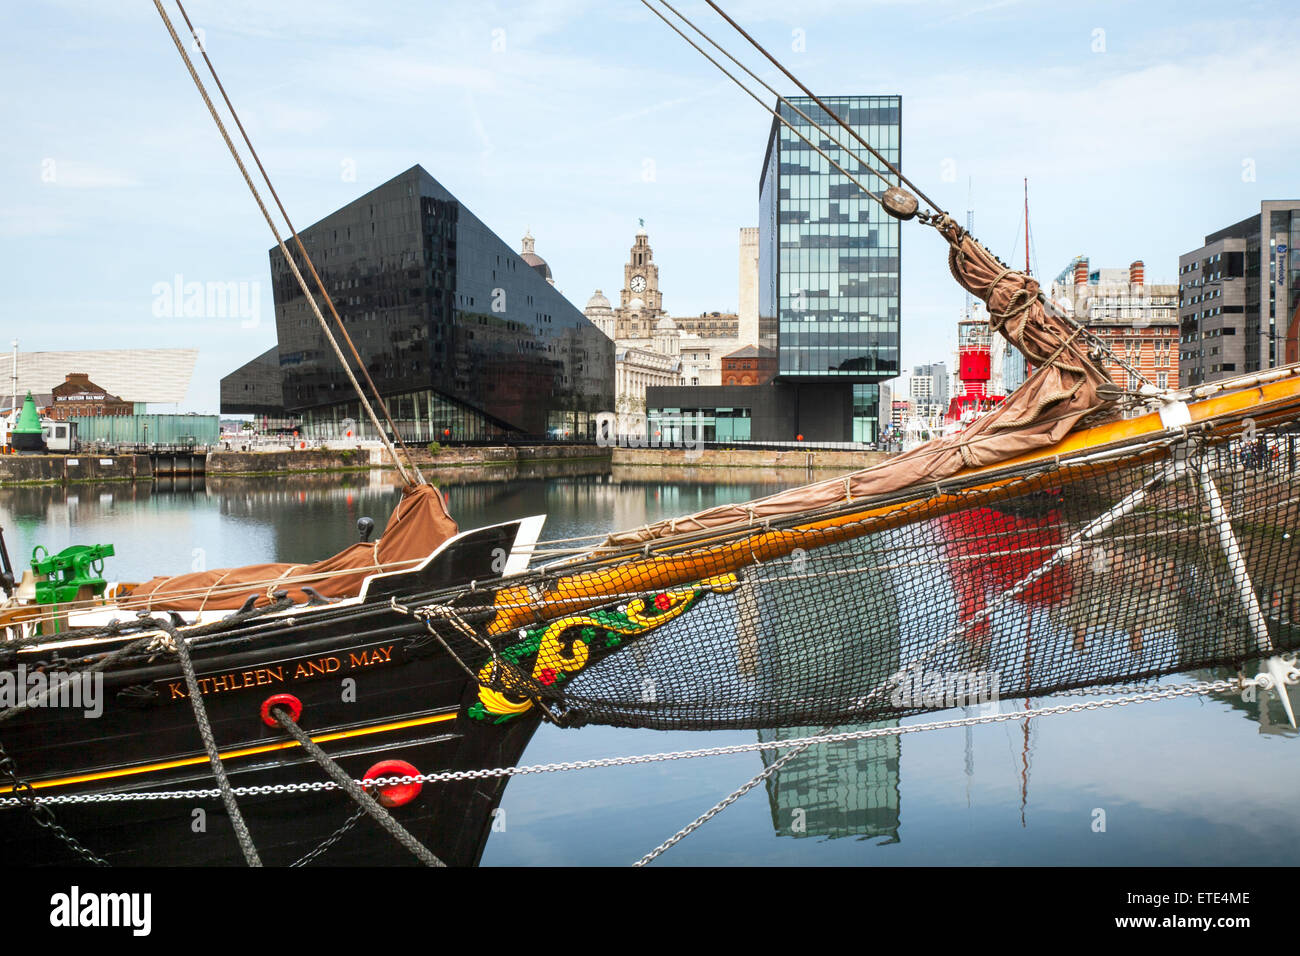 Kathleen and May Tall ship, British built wooden hull three masted top sail schooner moored in Canning Dock with Mann Island Development  on the Stock Photo